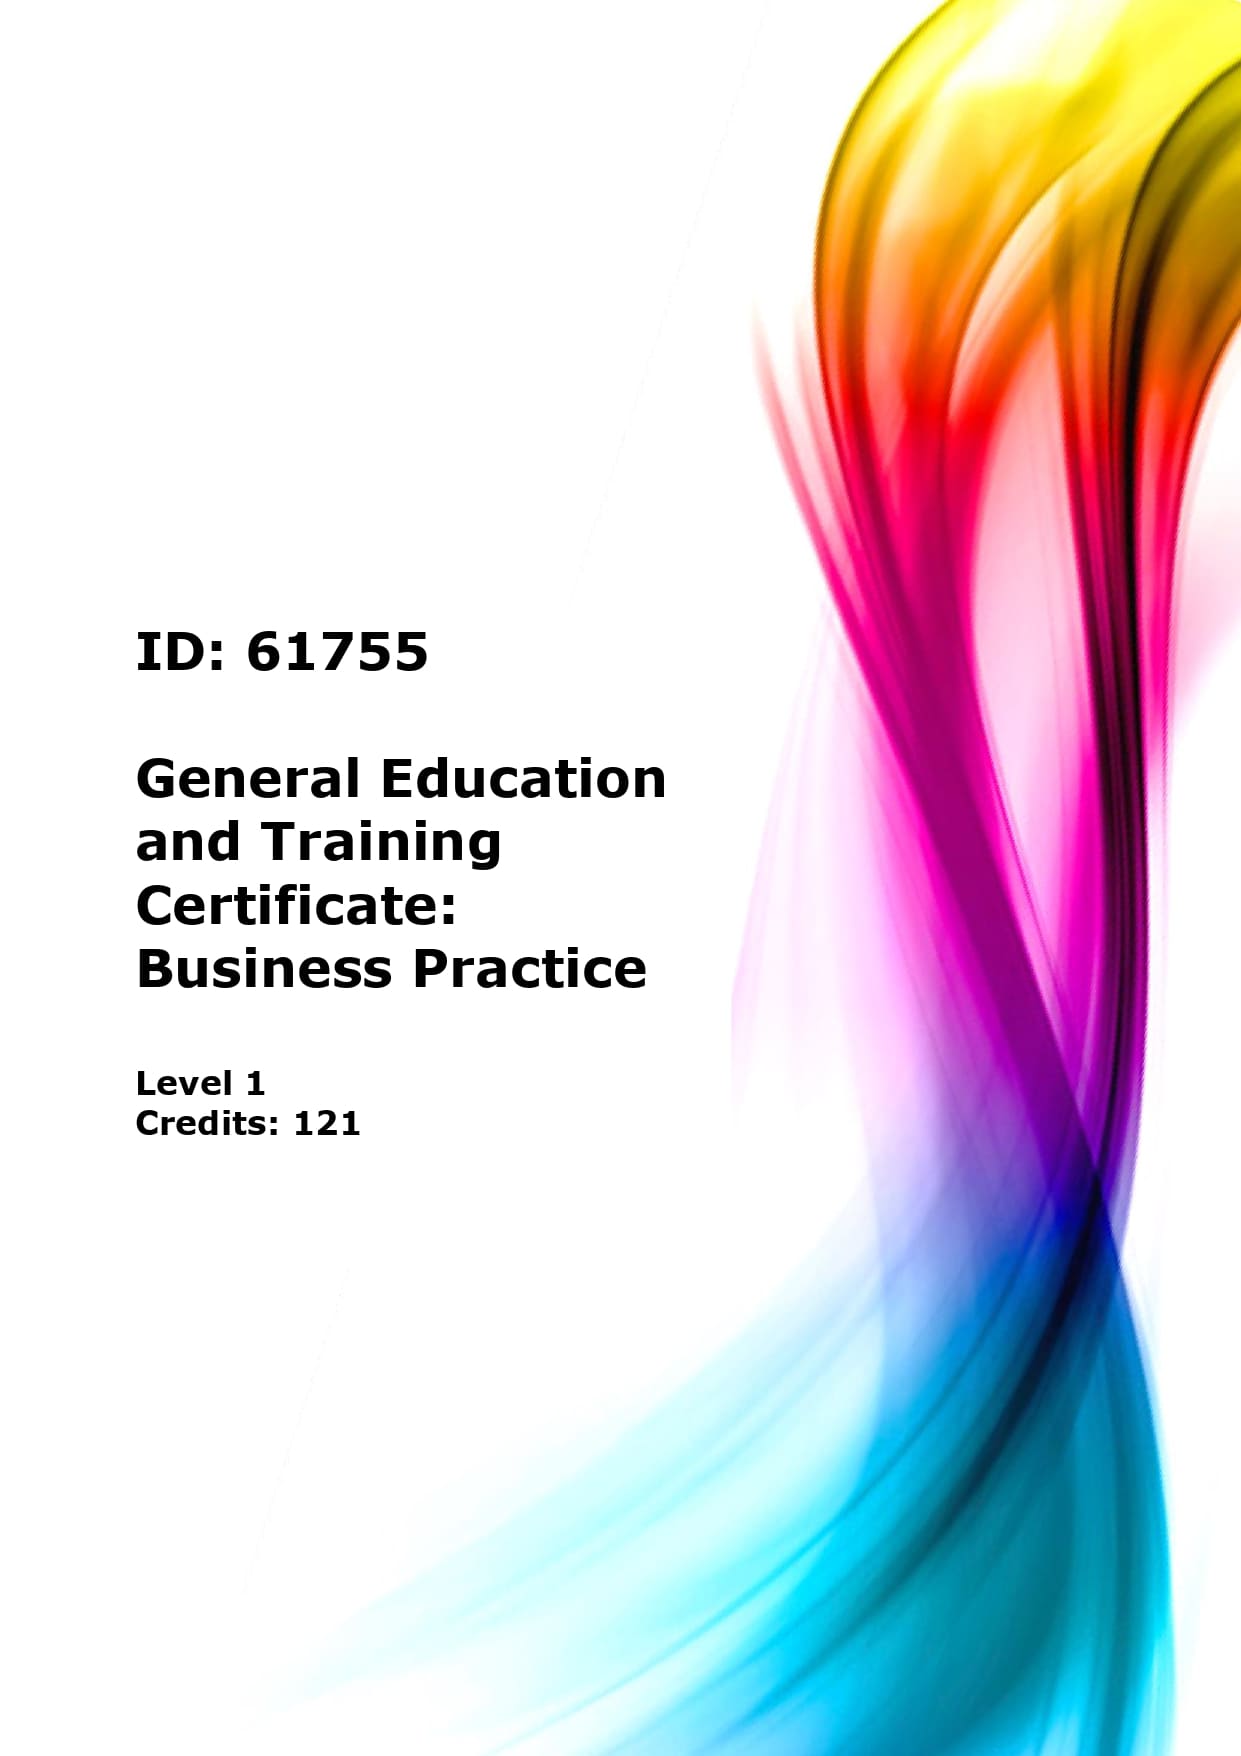 General Education and Training Certificate: Business Practice